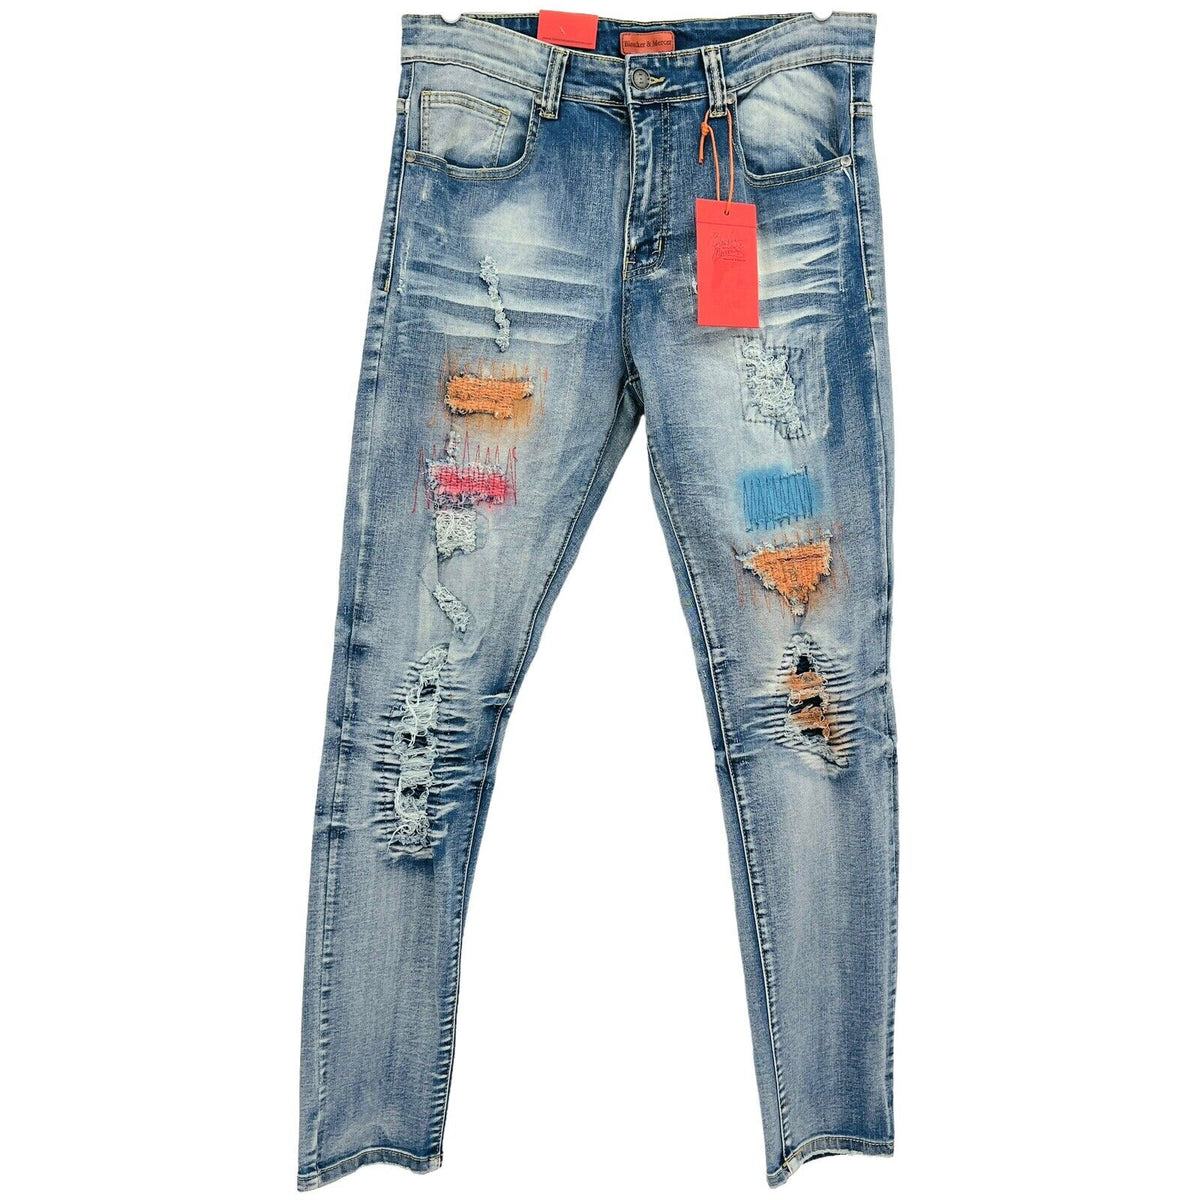 Ripped and Repaired Washed Denim with Spray Paint Stretch Slim Fit Jea ...